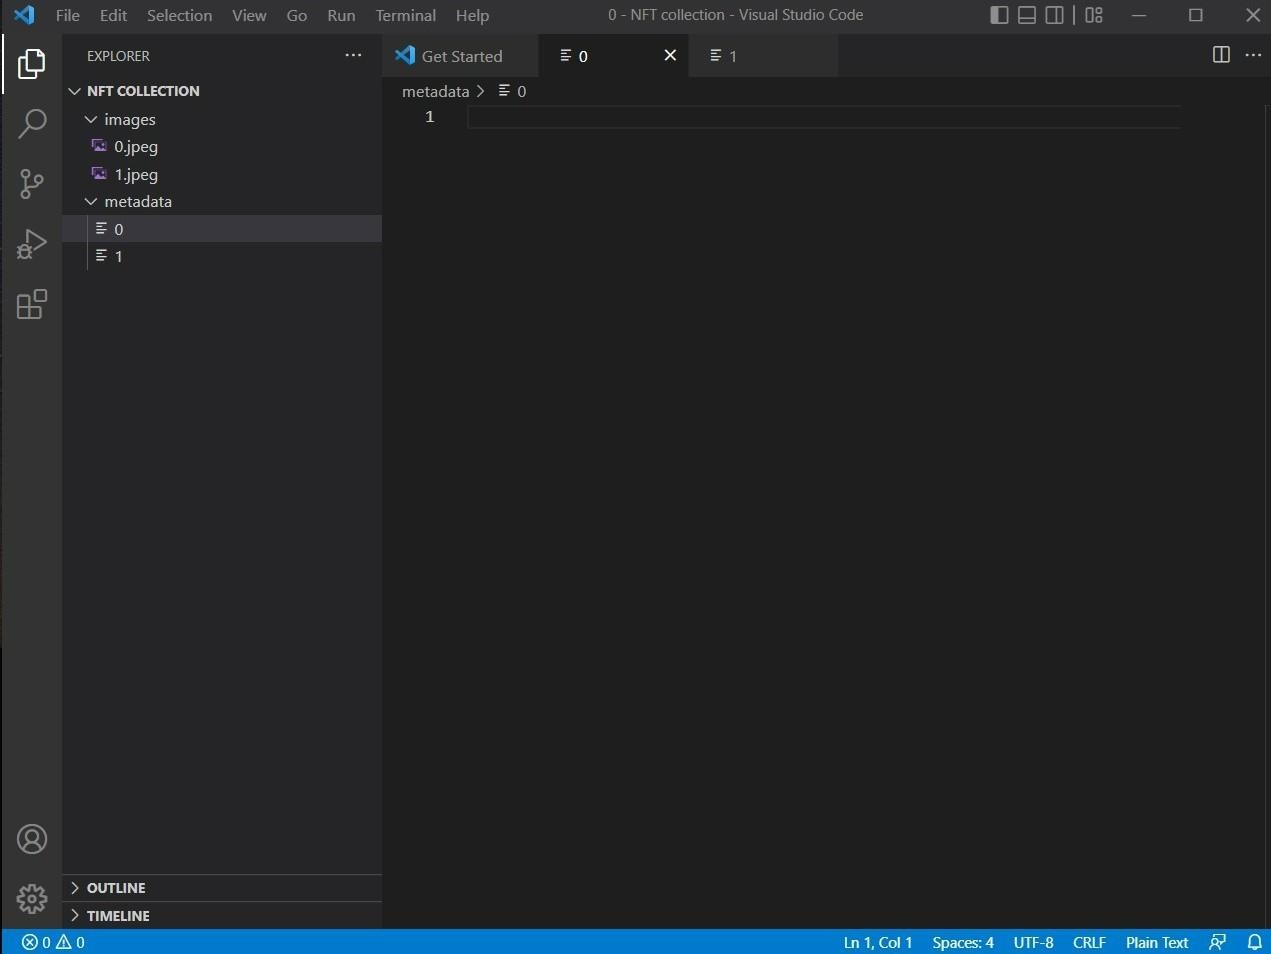 Create NFT collection in Visual Studio Code